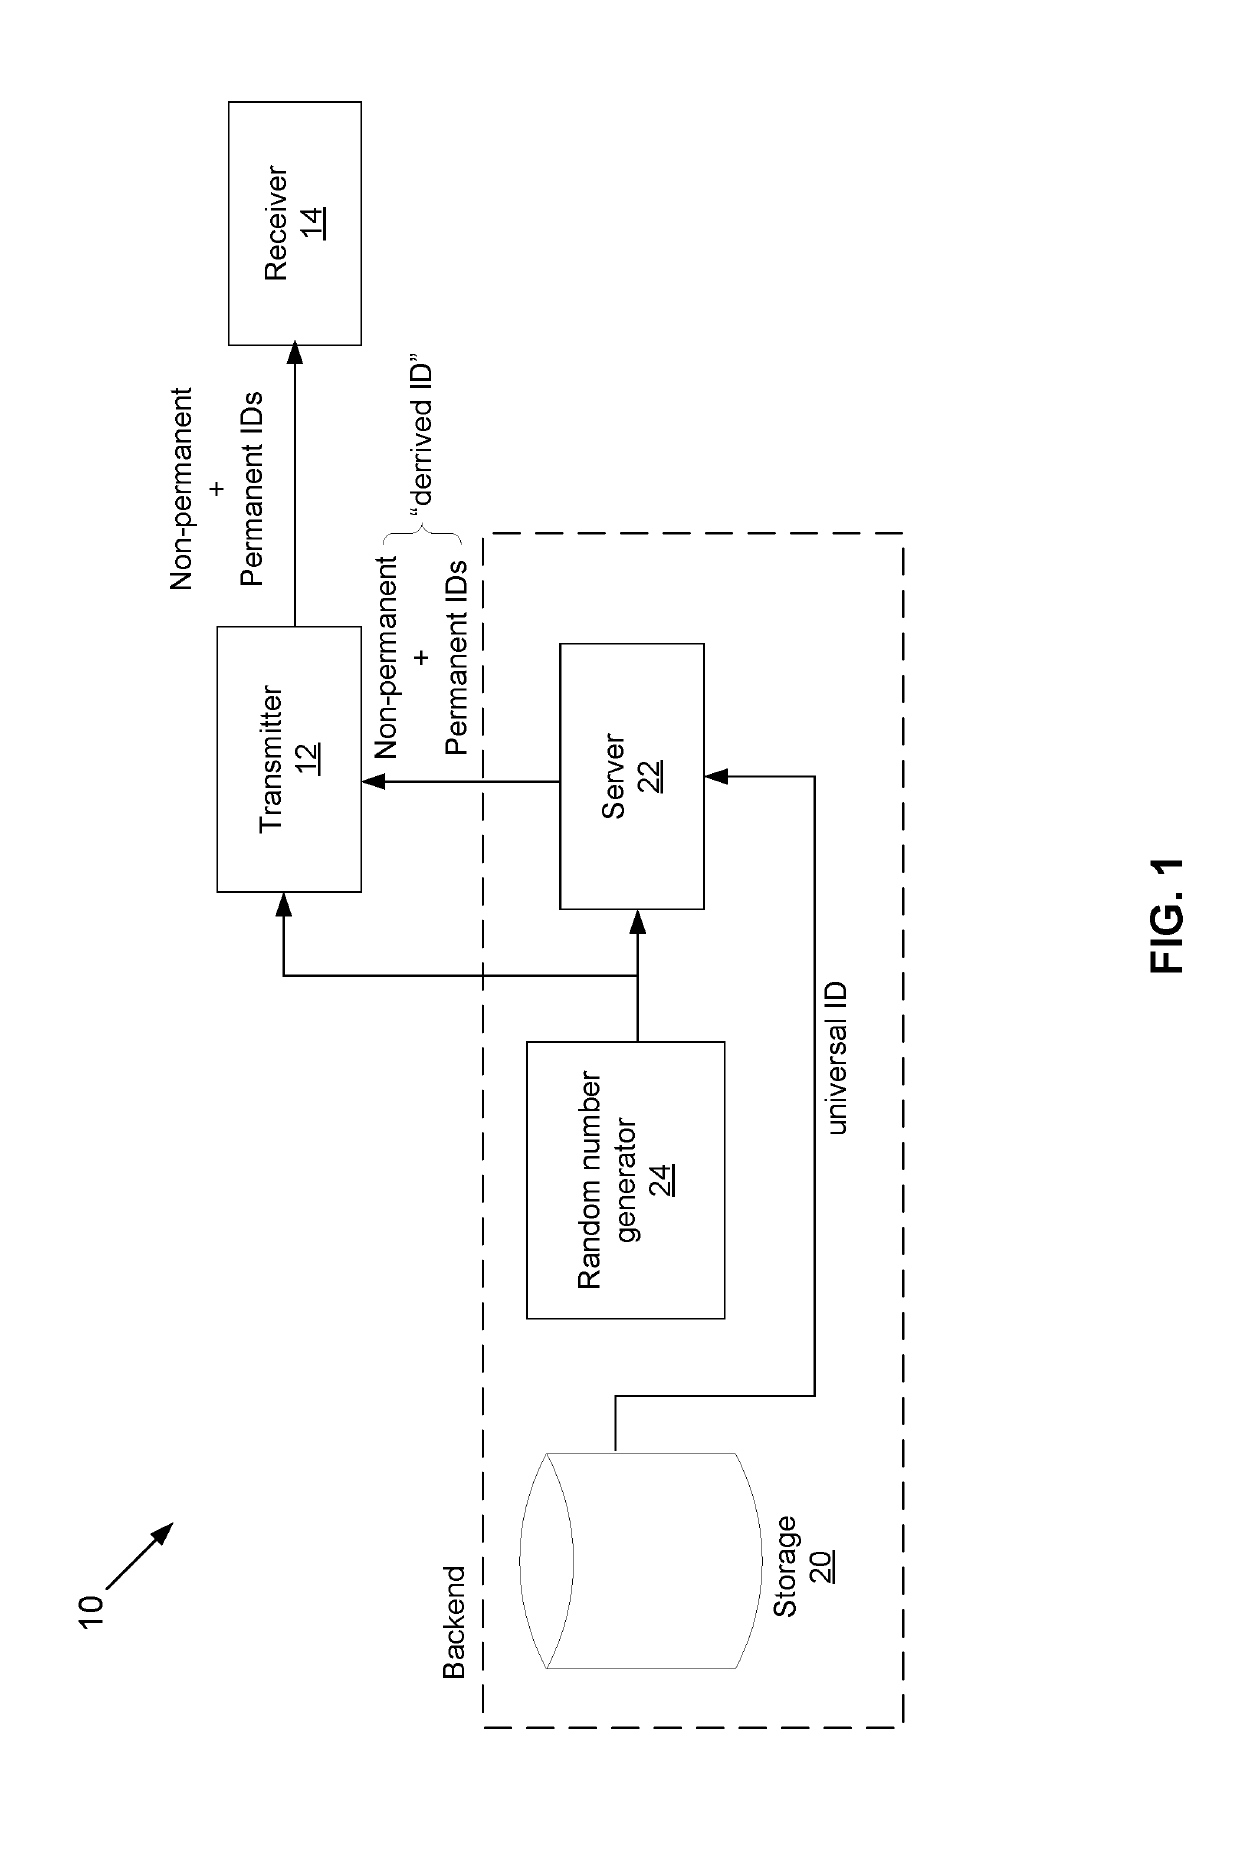 Universal id system and methods and biometric information